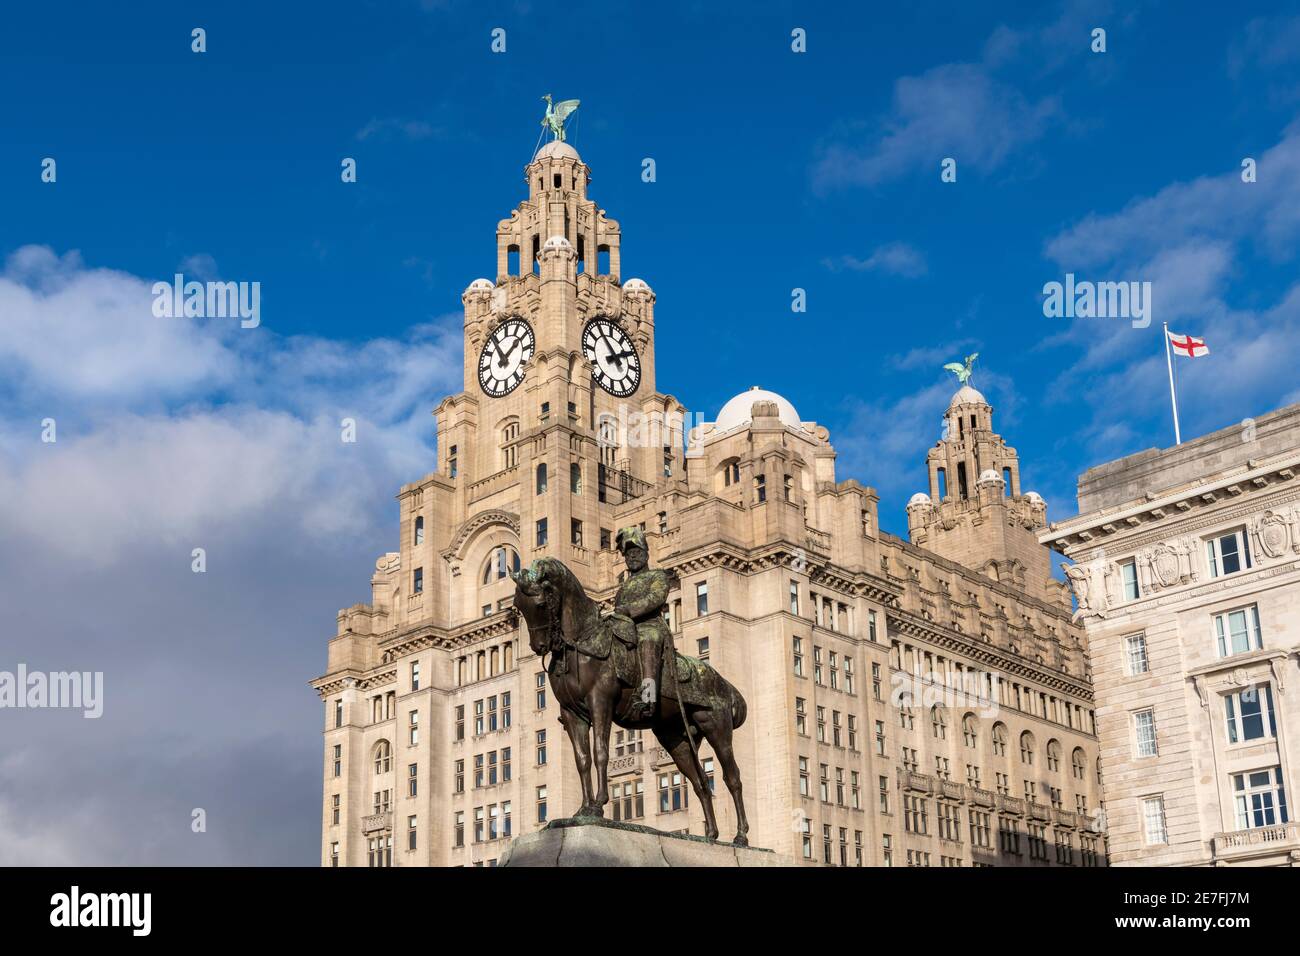 Statue of King Edward VII and the Royal Liver Building, Liverpool Waterfront, England Stock Photo